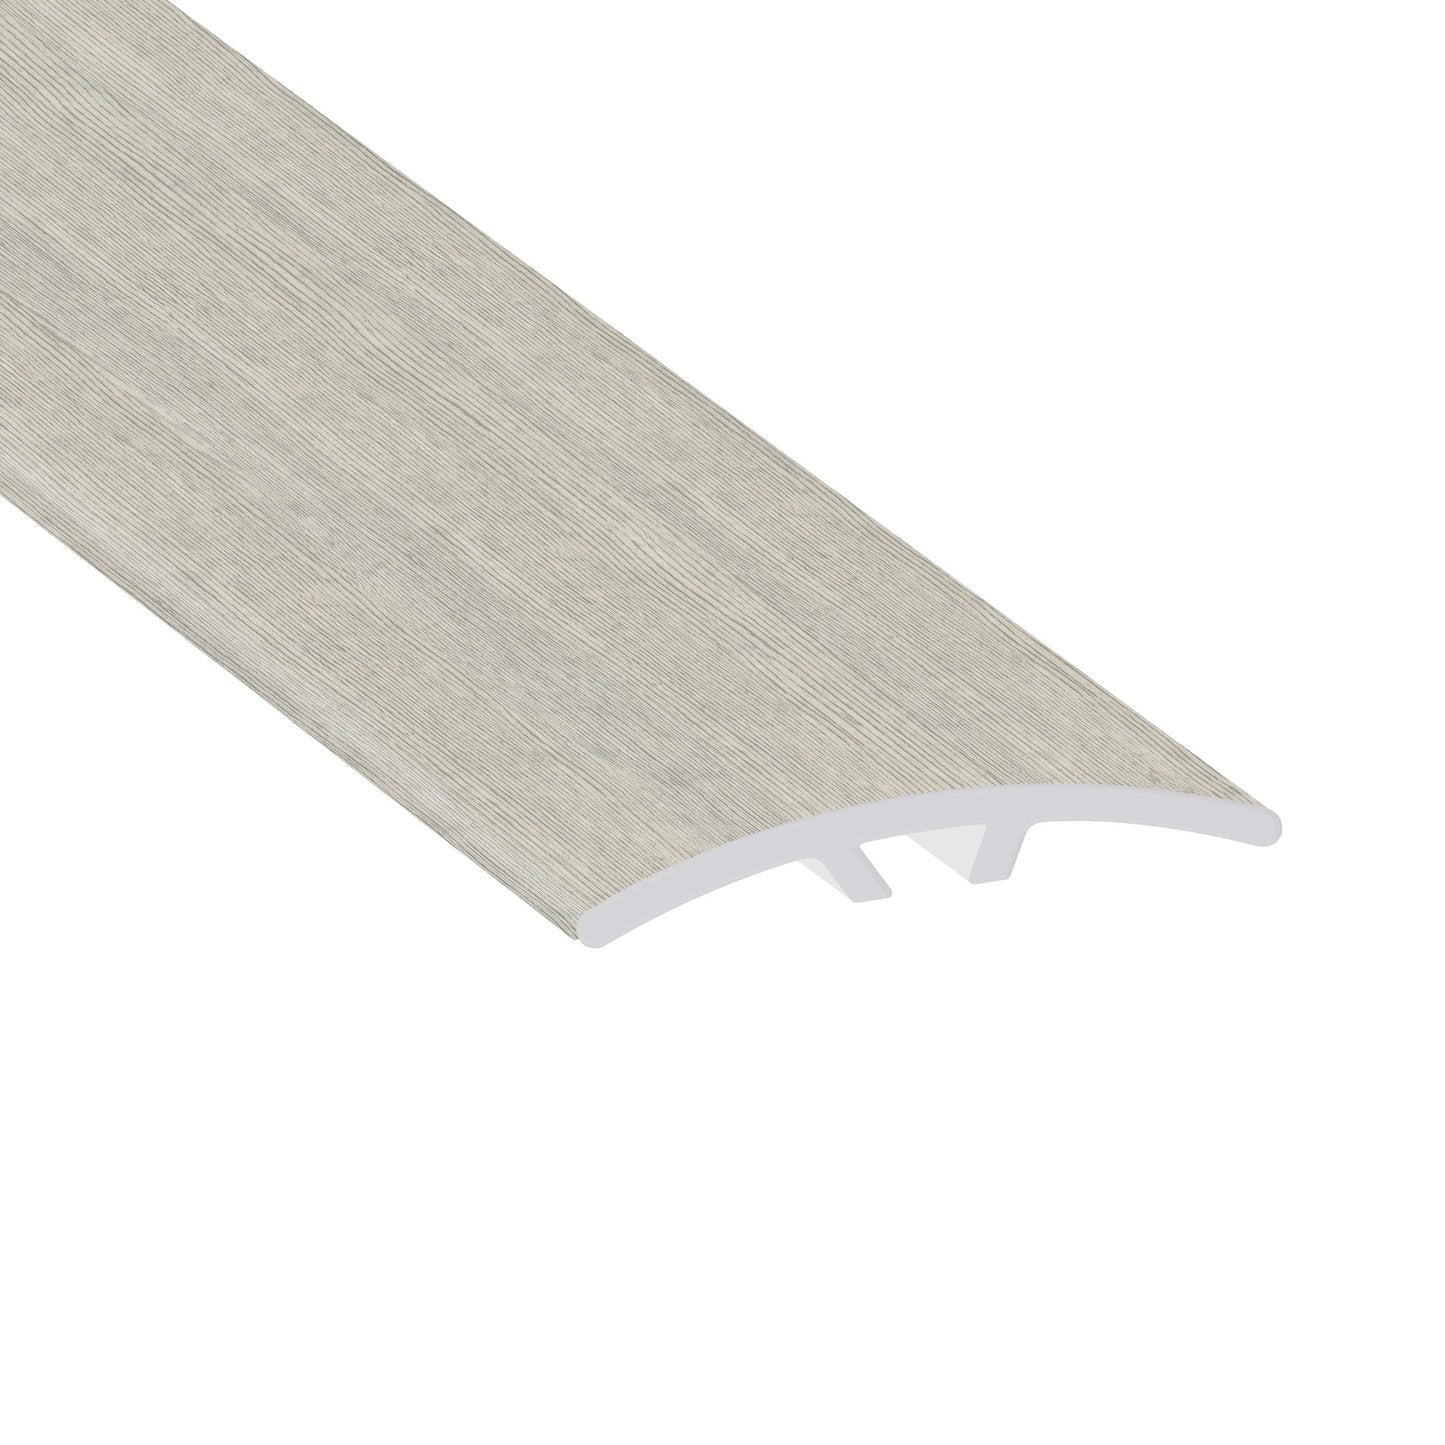 Morning Frost 0.23 in. Thick x 1.59 in. Width x 94 in. Length Multi-Purpose Reducer Vinyl Molding